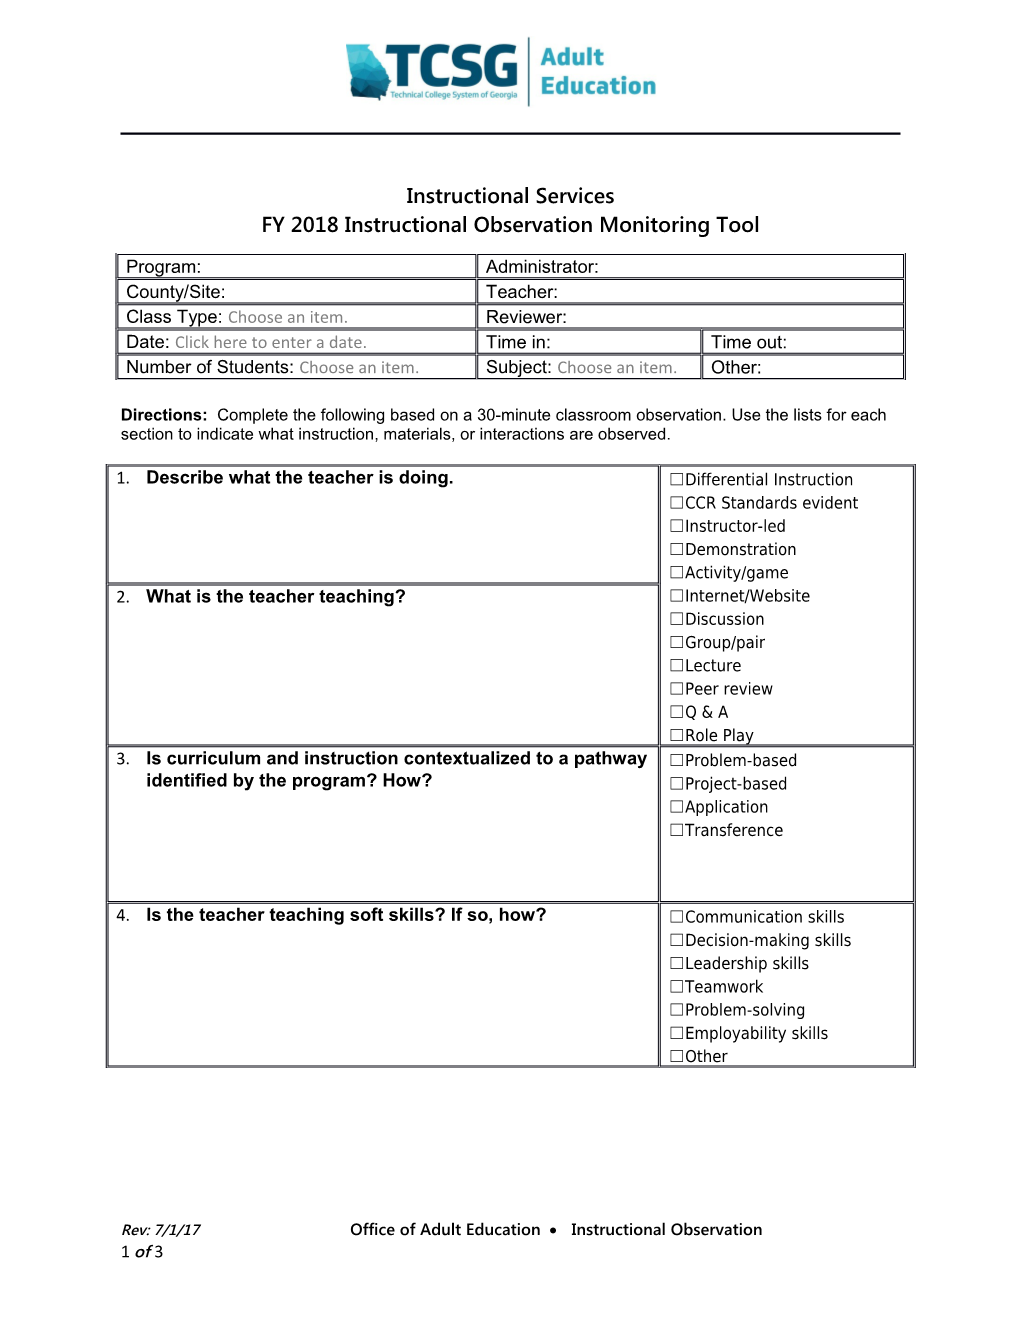 FY 2018 Instructional Observation Monitoring Tool